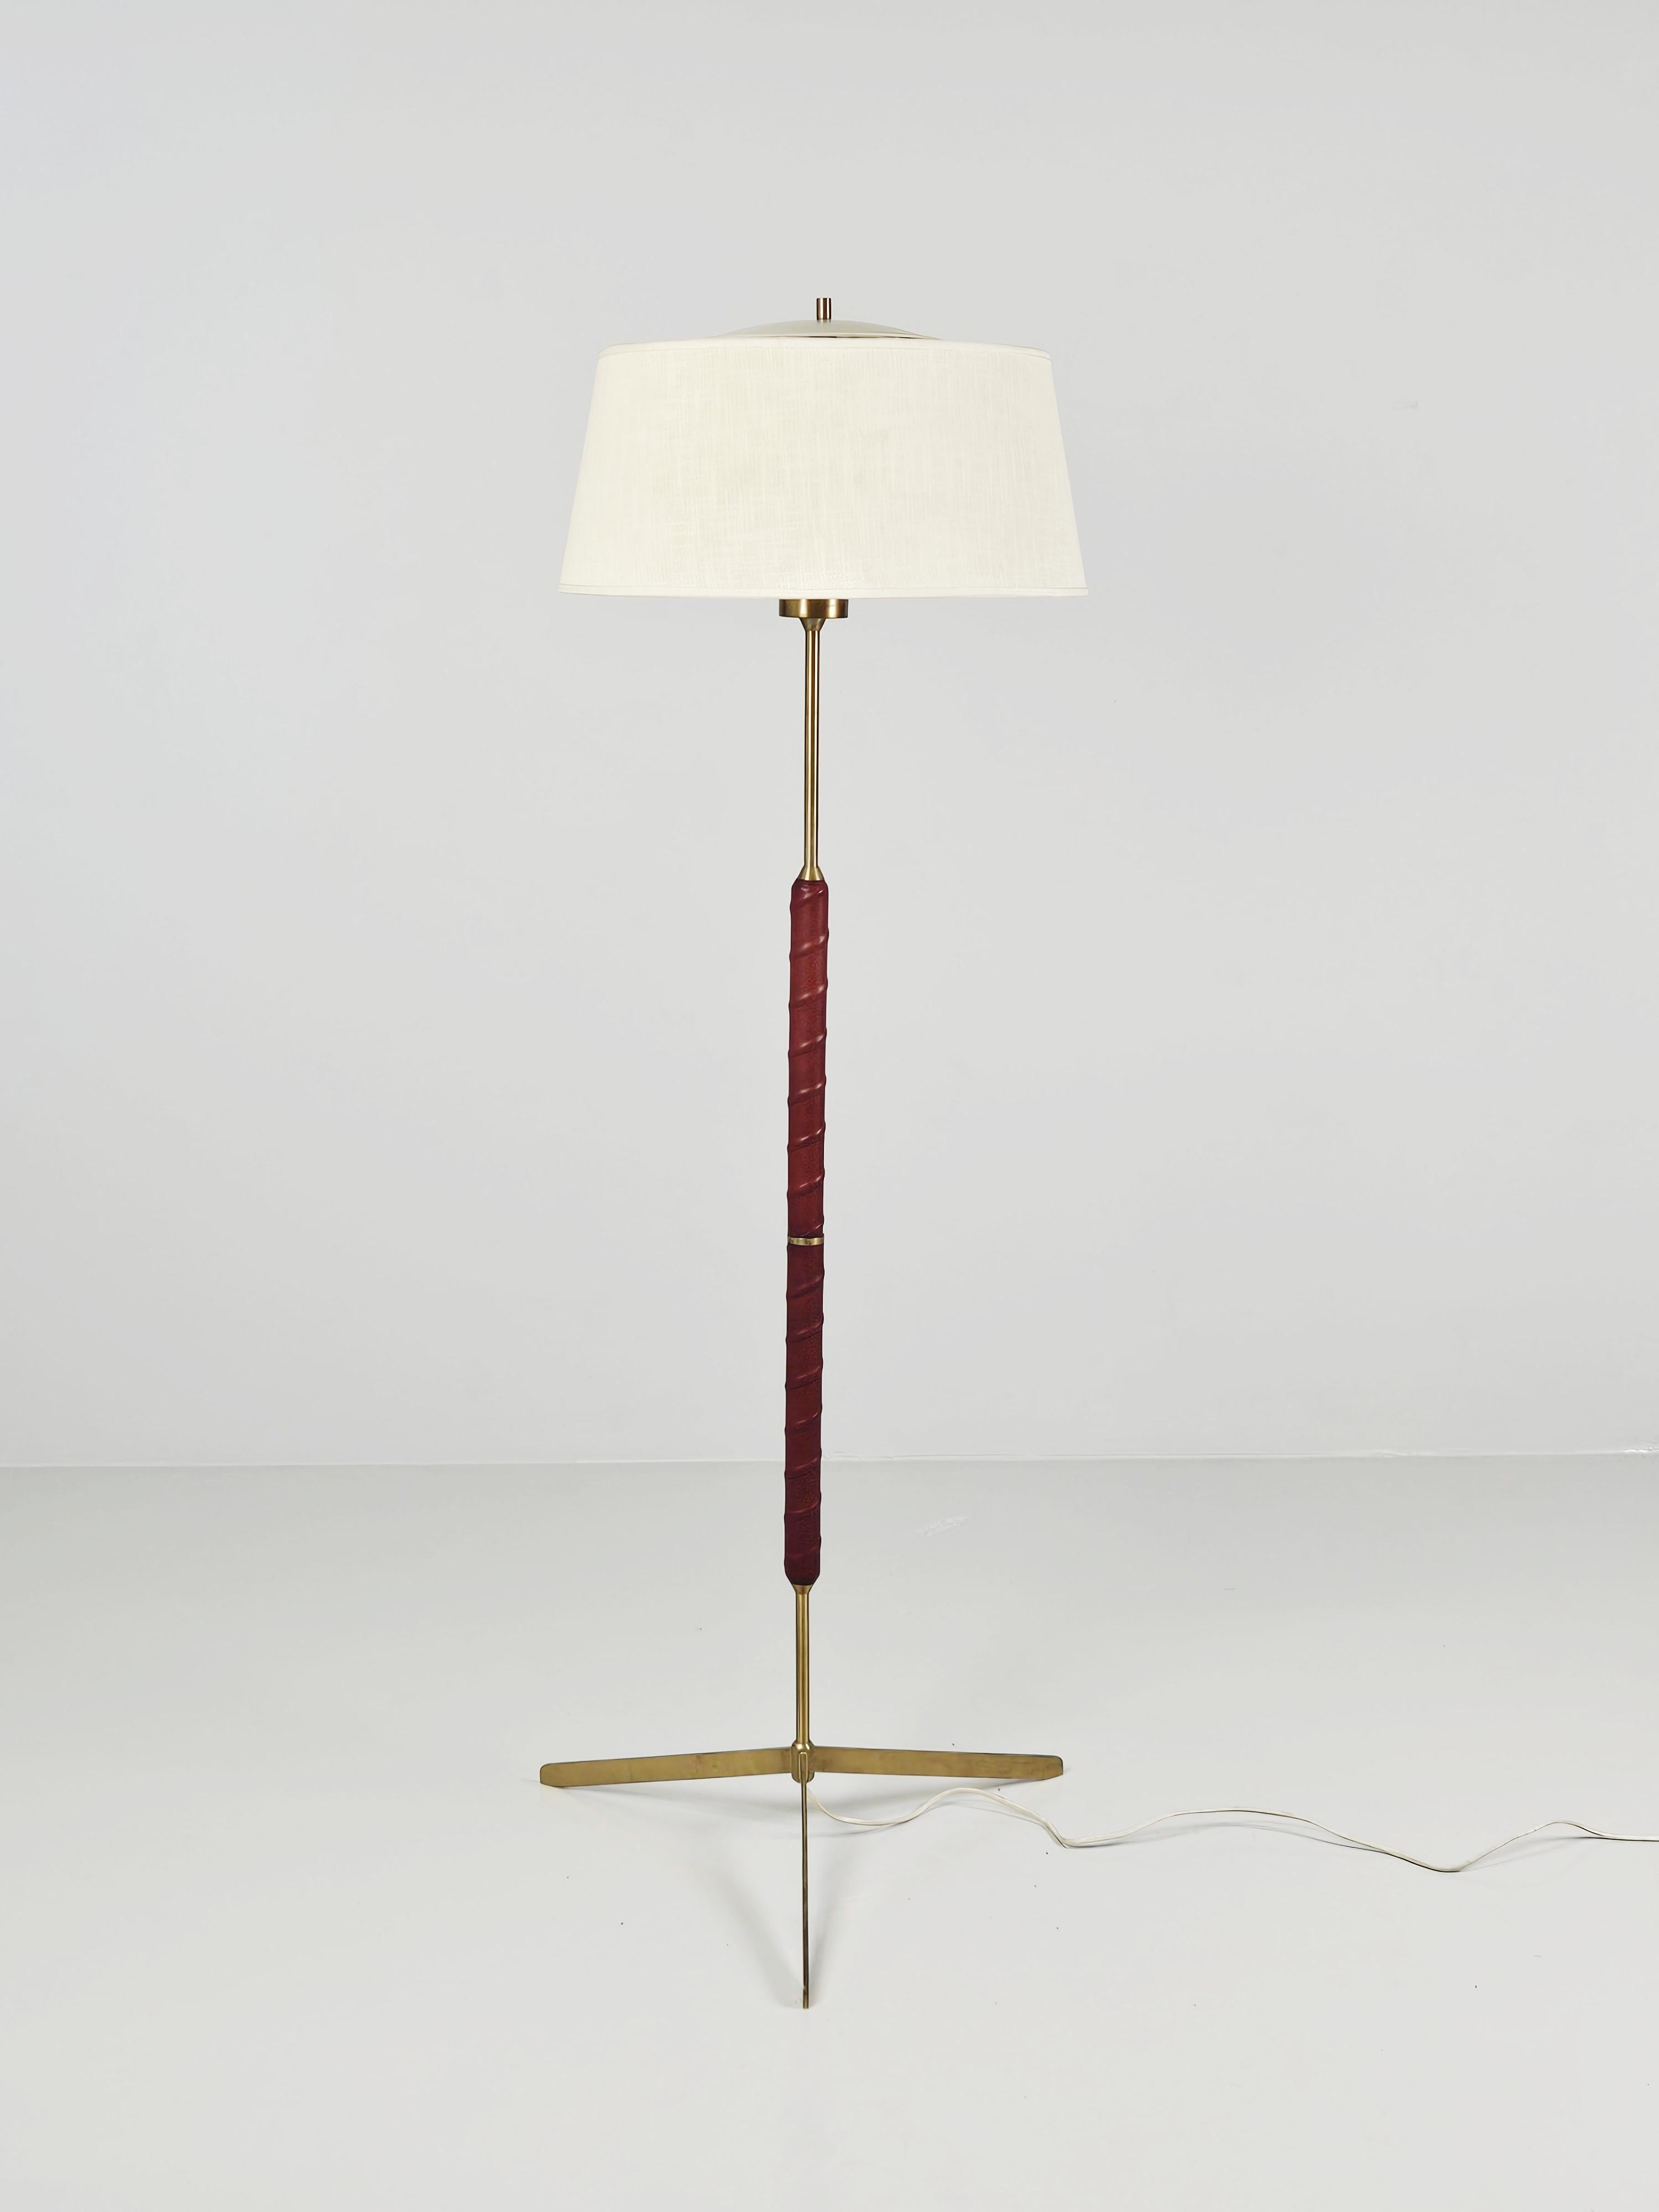 Rare floor lamp produced by the swedish company Bergboms in the 1960s. 

Model 'G-031' has a modernistic design with a tripod foot in solid brass. The neck is wrapped in hight quality leather. 

Original shade.